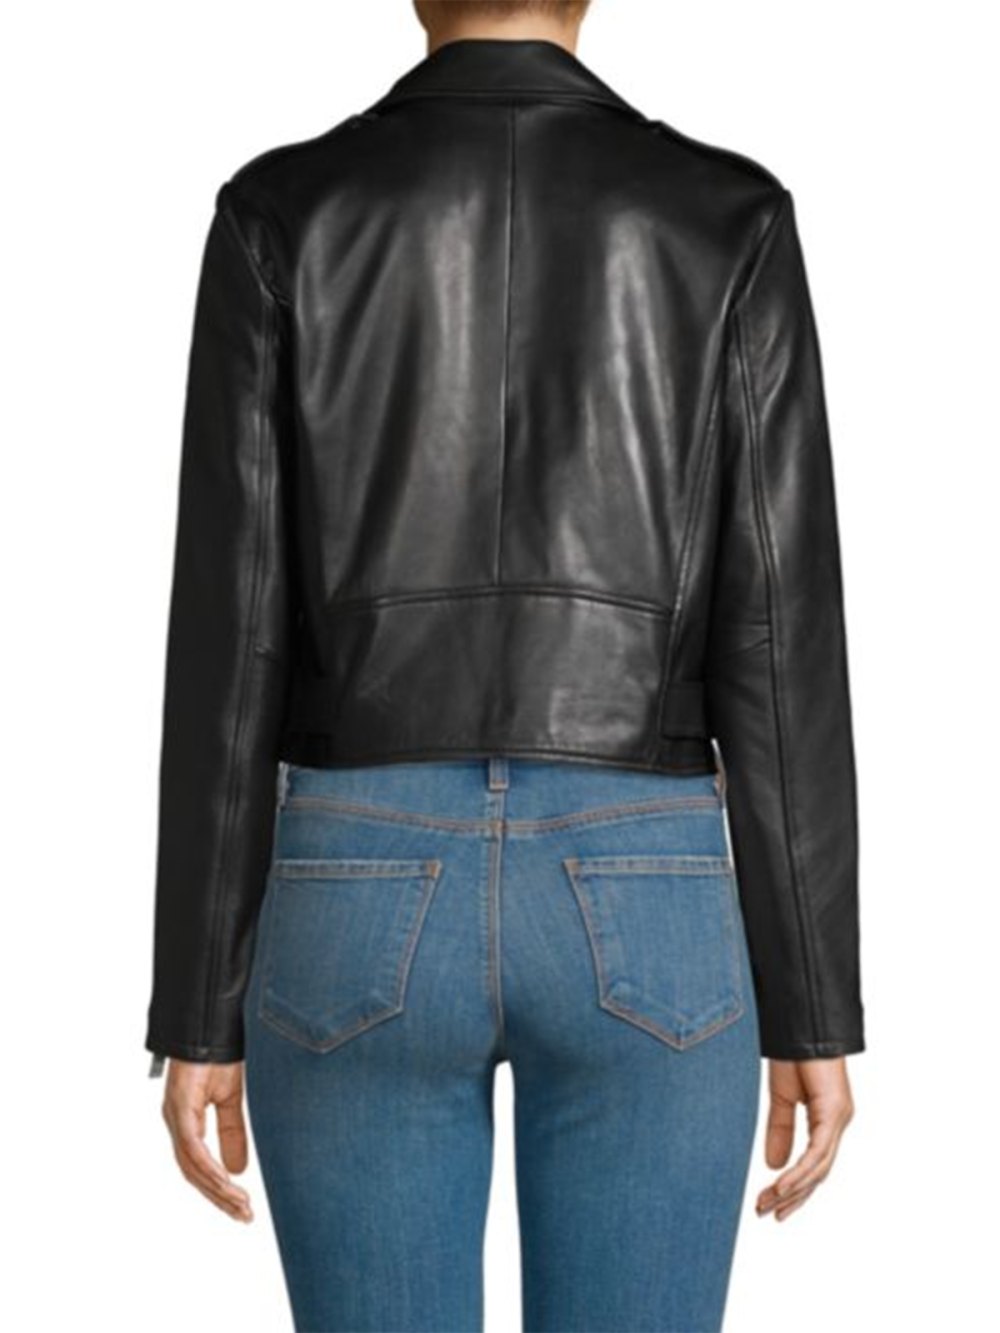 This Designer Leather Jacket Is Nearly 70% Off At Saks Off 5th | Us Weekly